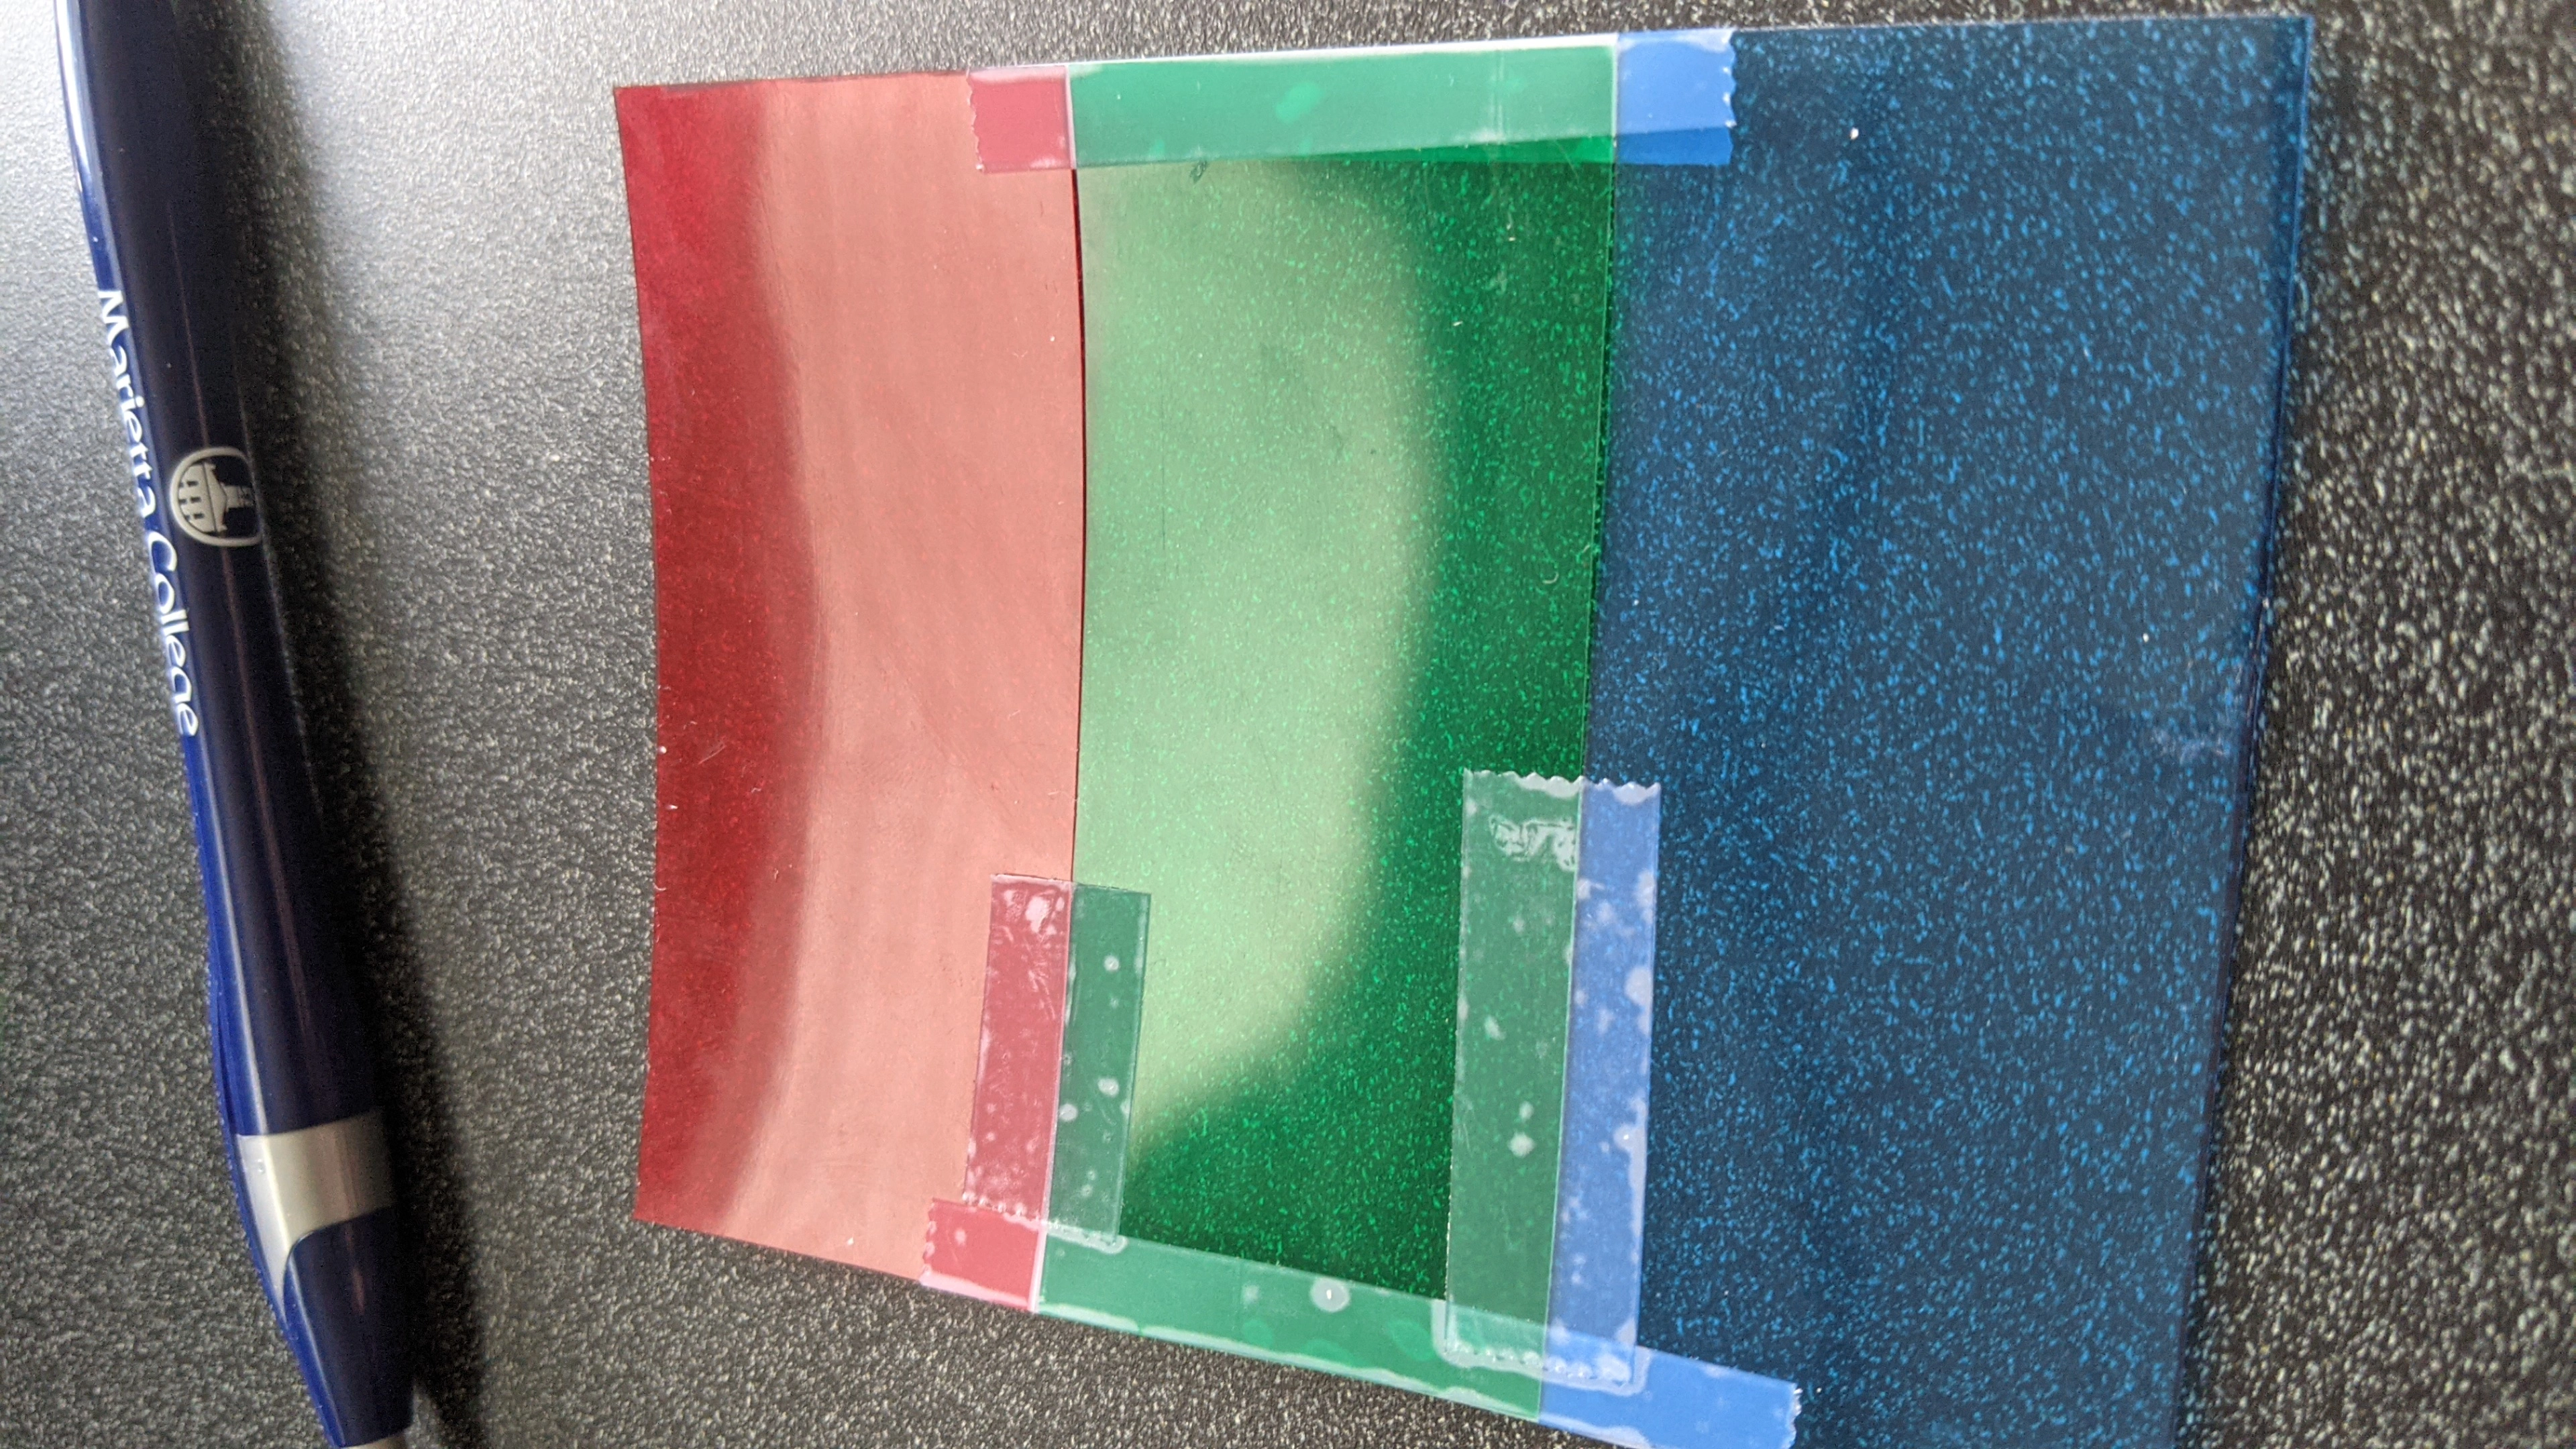 Three small colored pieces of plastic taped together in strips